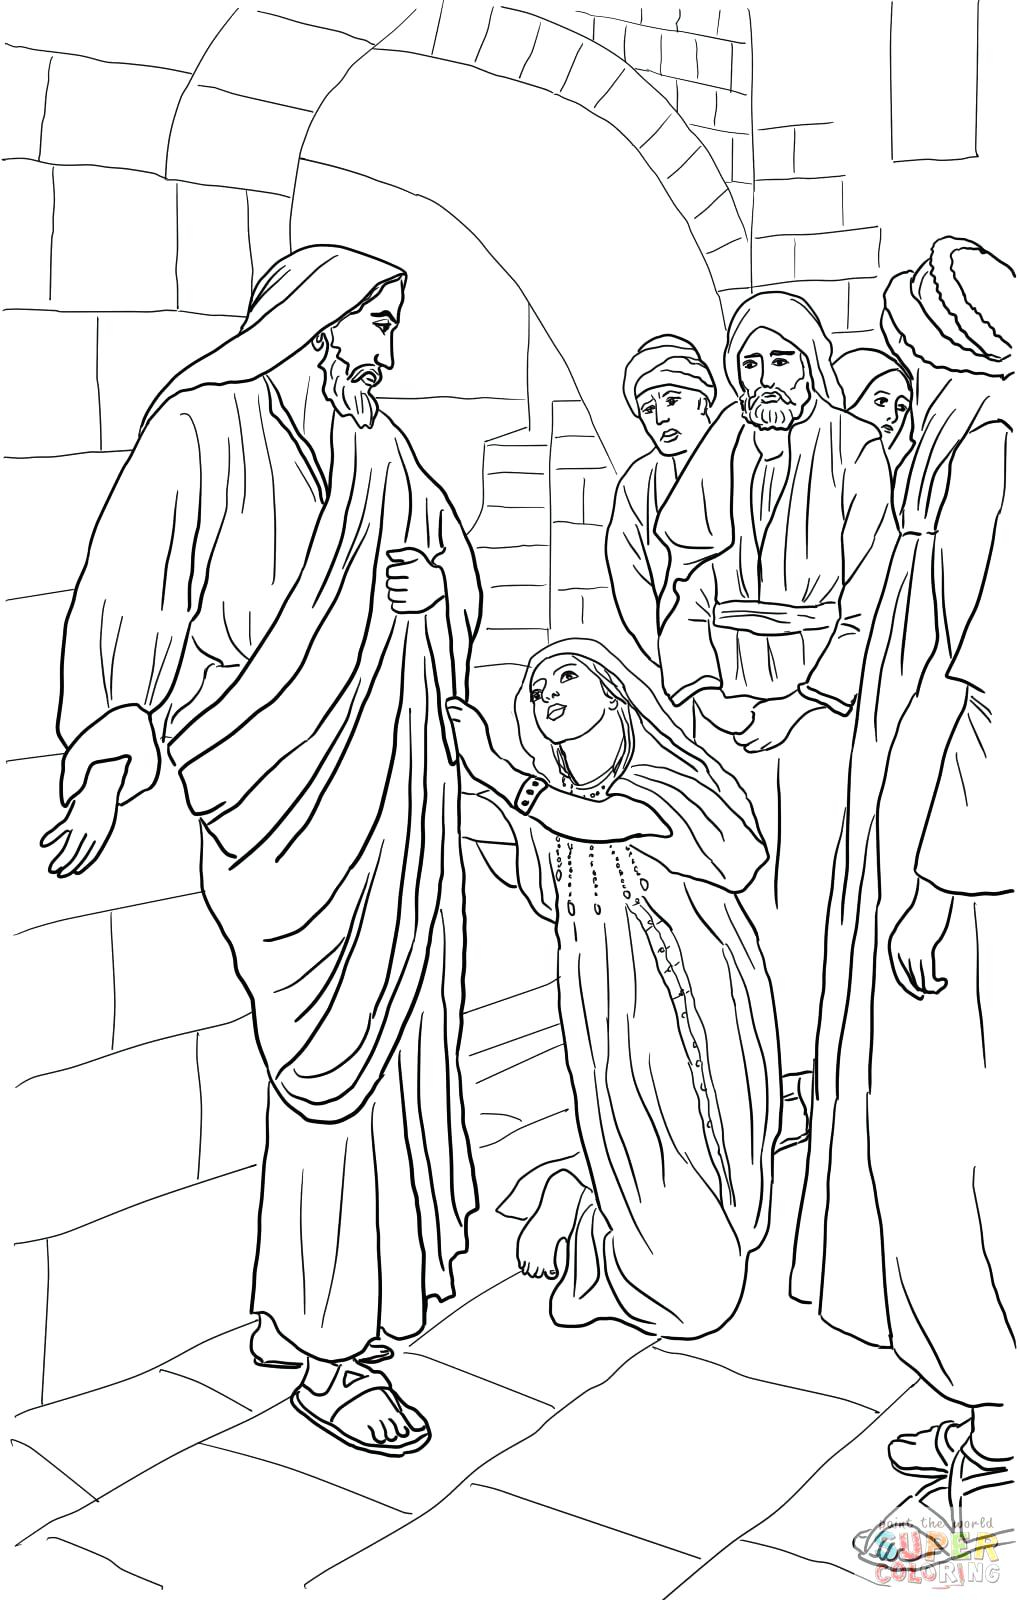 Jesus Heals The Leper Coloring Page Coloring Page Jesus Heals The Leper Coloring Page Free Printable